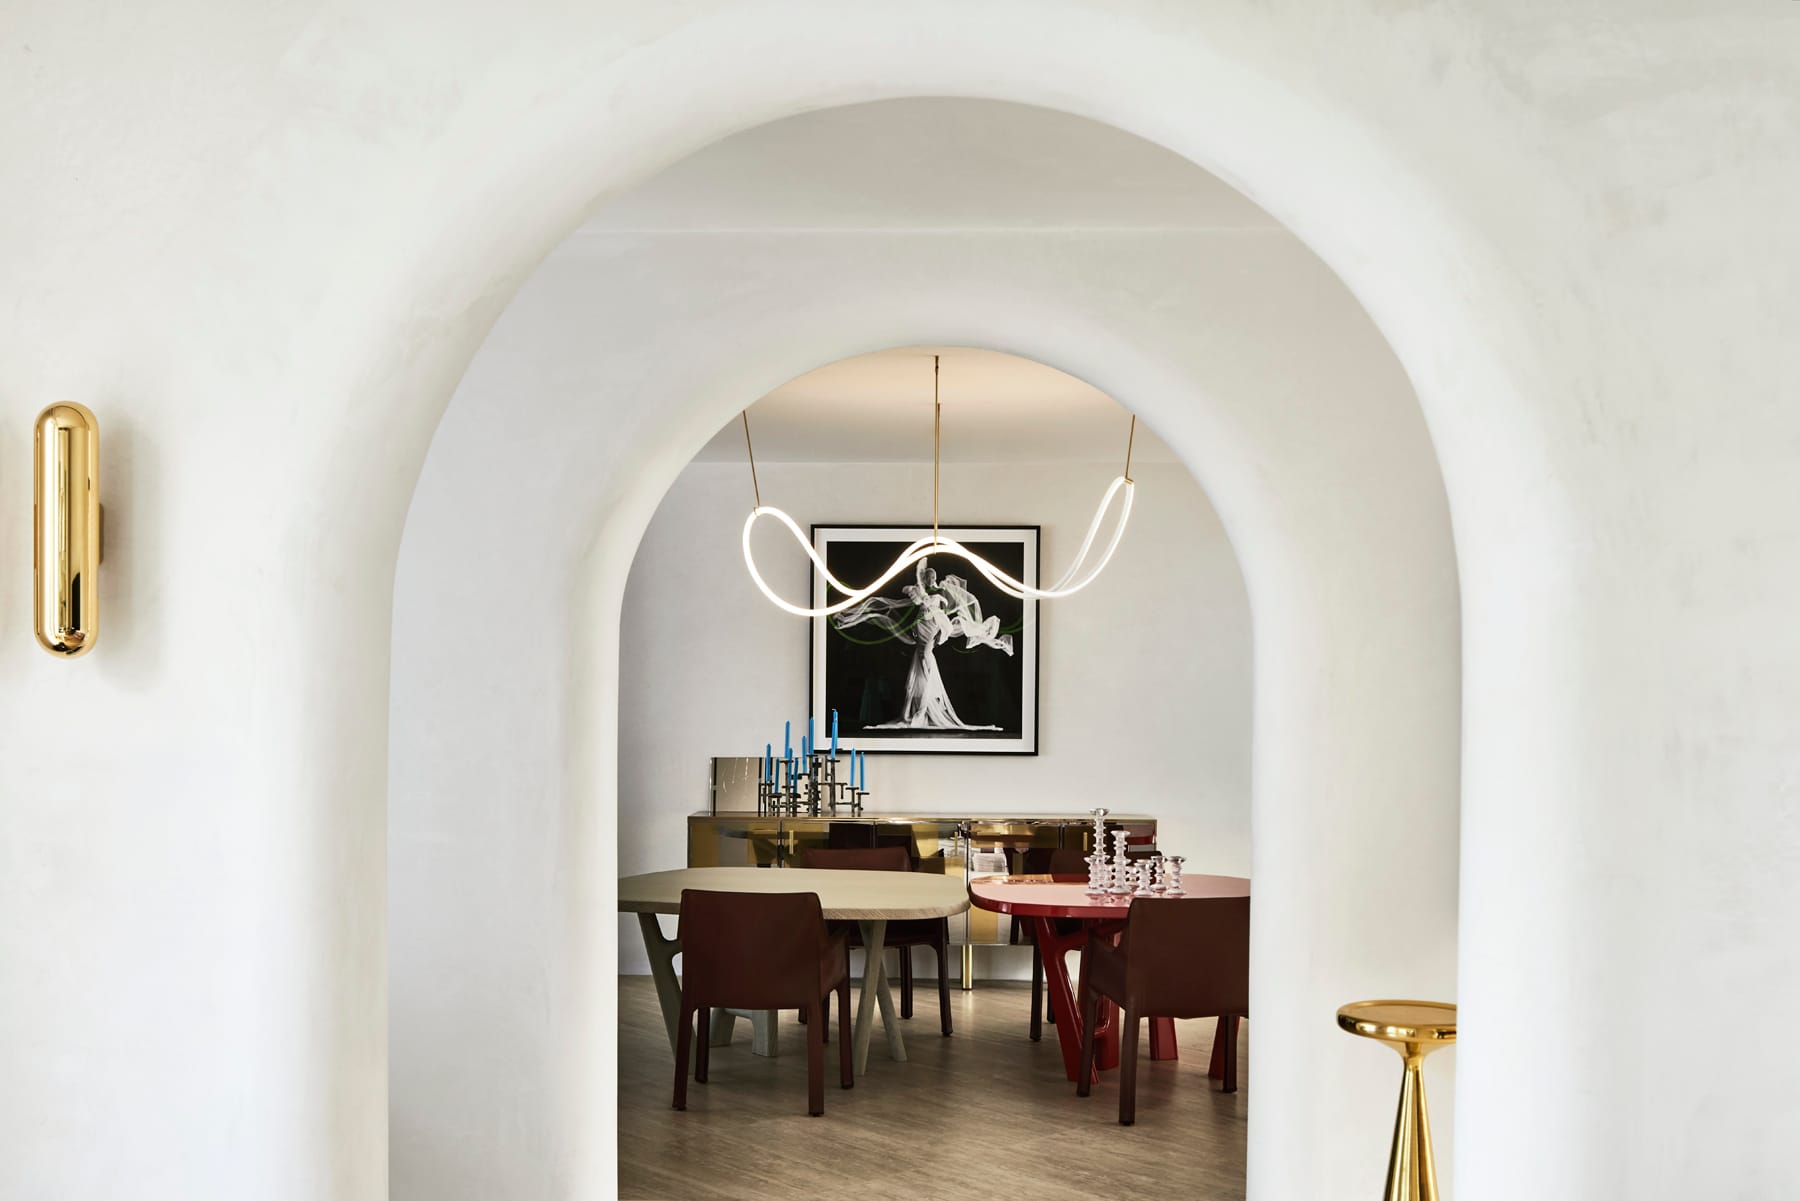 Toorak House 2 by K.P.D.O. Photography by Sharyn Cairns. Multiple archways framing dining room. Red and white table with red dining chairs. Abstract pendant lighting. Gold furniture scattered throughout. 